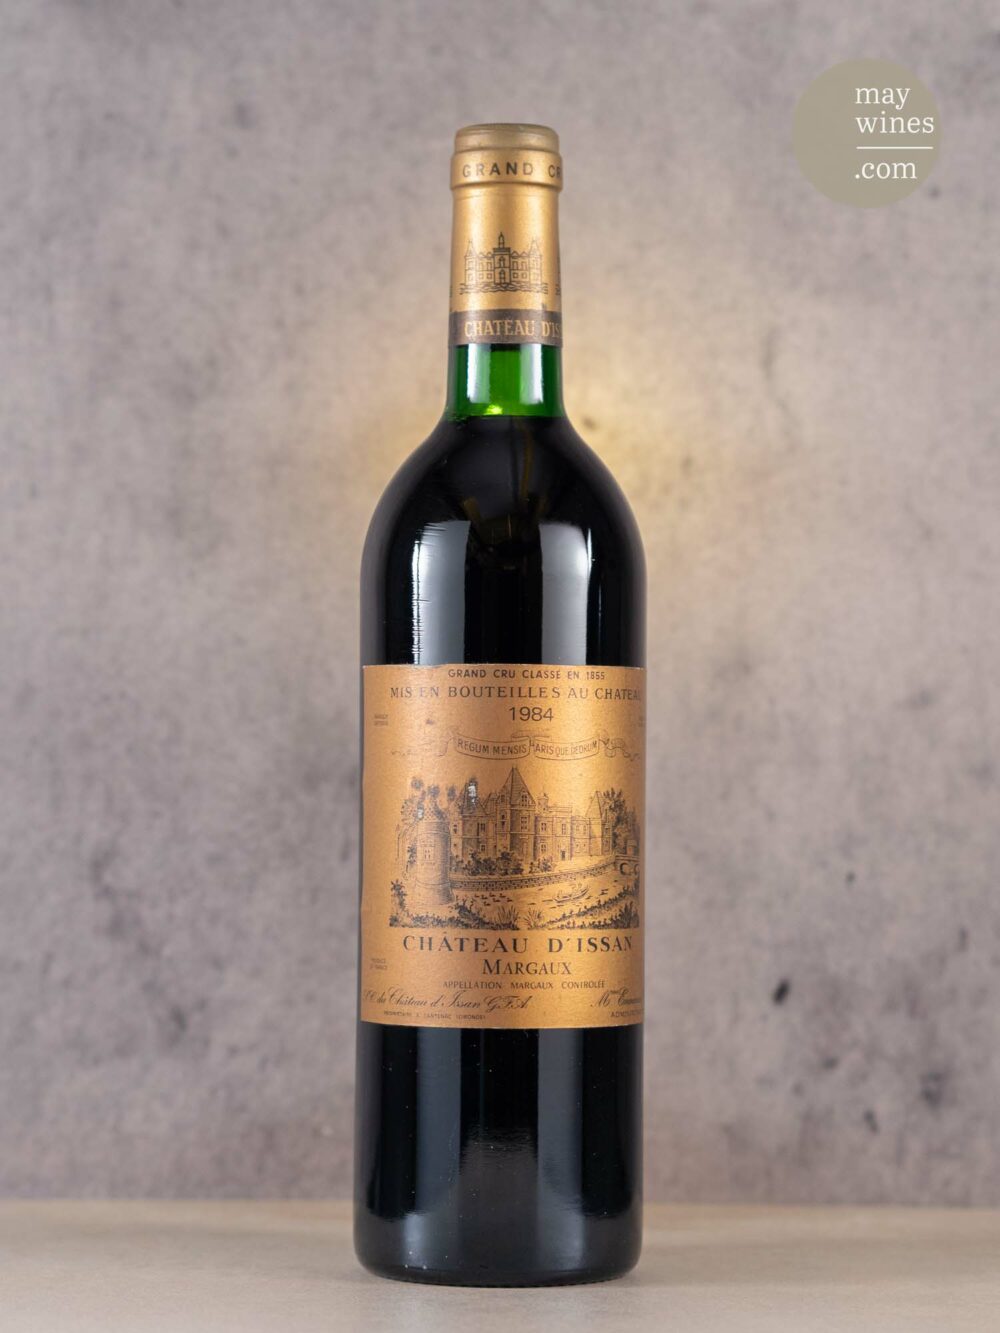 May Wines – Rotwein – 1984 Château d'Issan